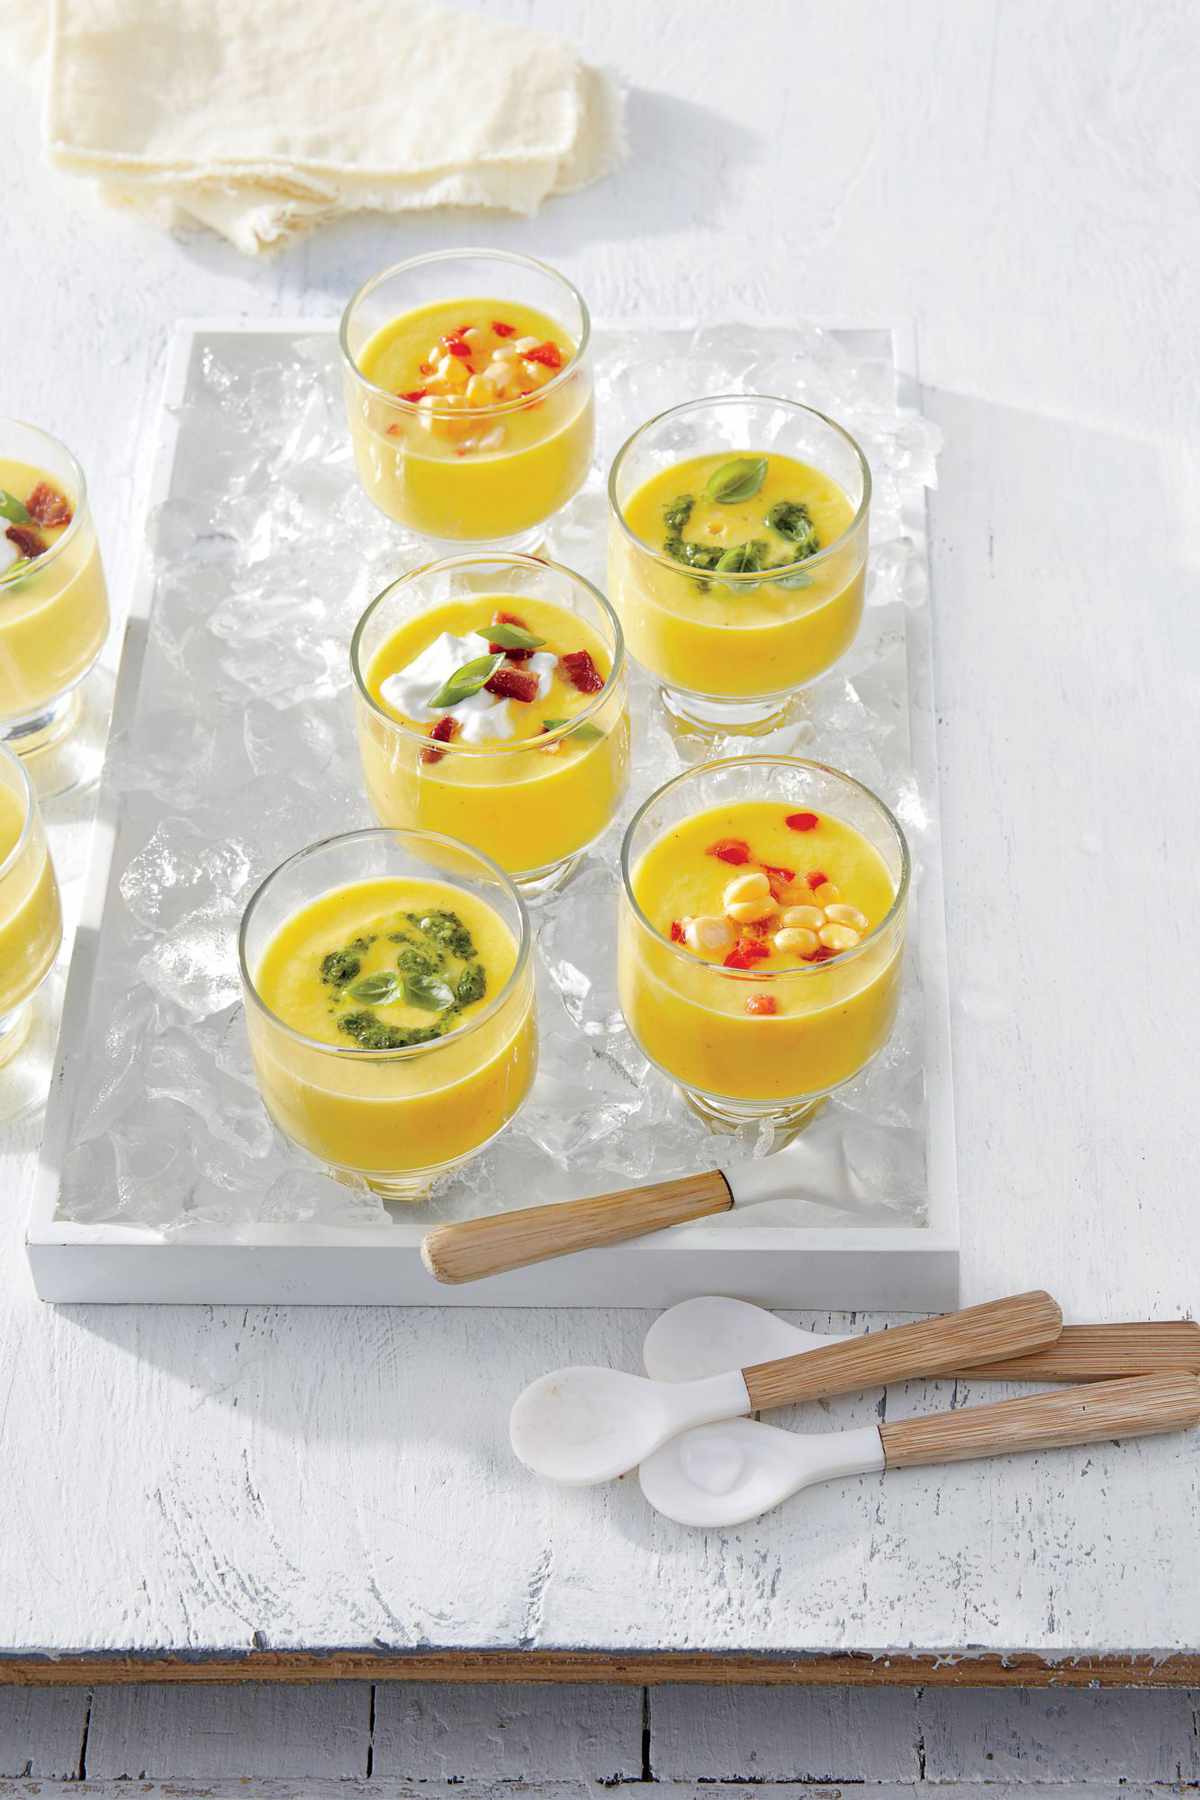 Chilled Sweet Corn Soup